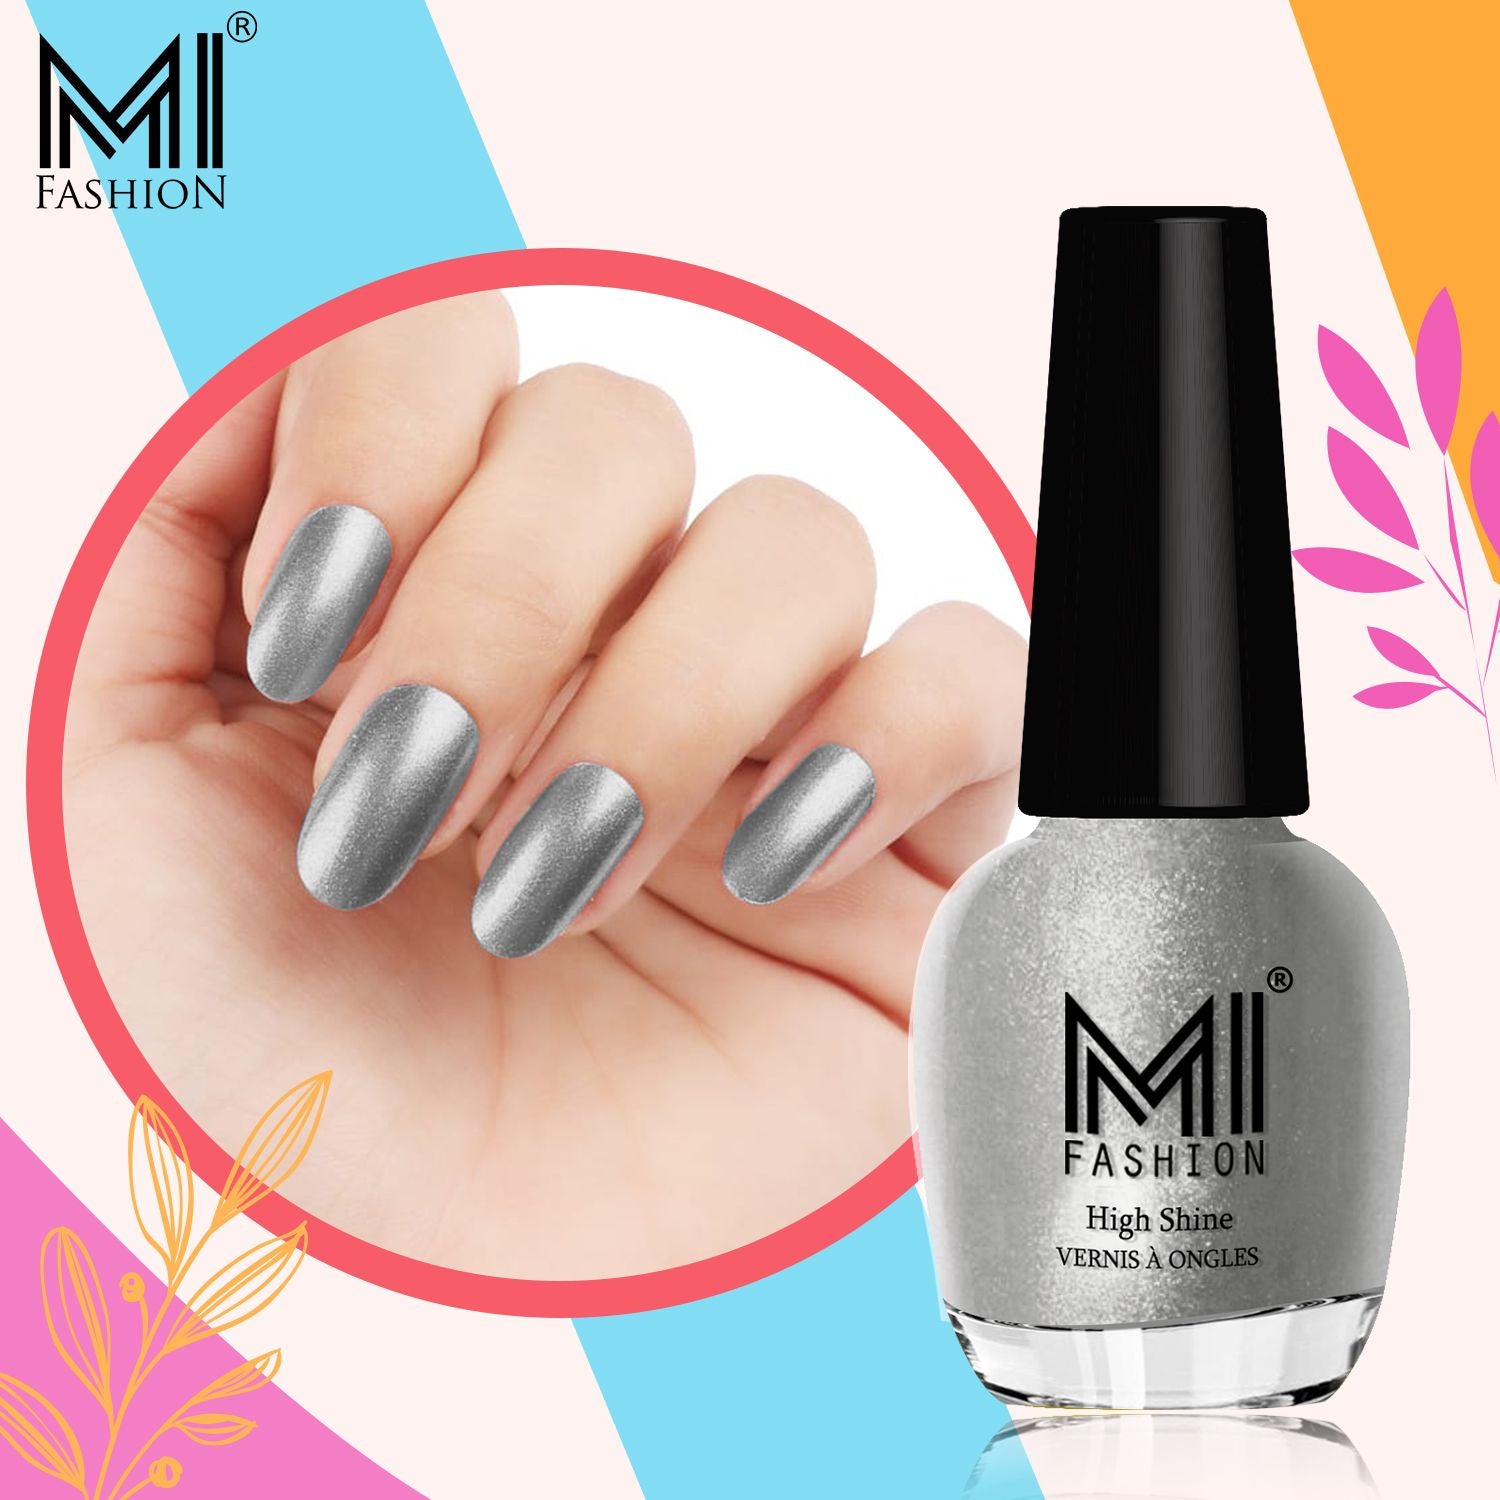 MI FASHION New Collection High Shine Long Wearing Nail Polishes Combo 12ml  each Combo No-01 Maroon Wine,Neon Pink,Red,Sea Green - Price in India, Buy MI  FASHION New Collection High Shine Long Wearing